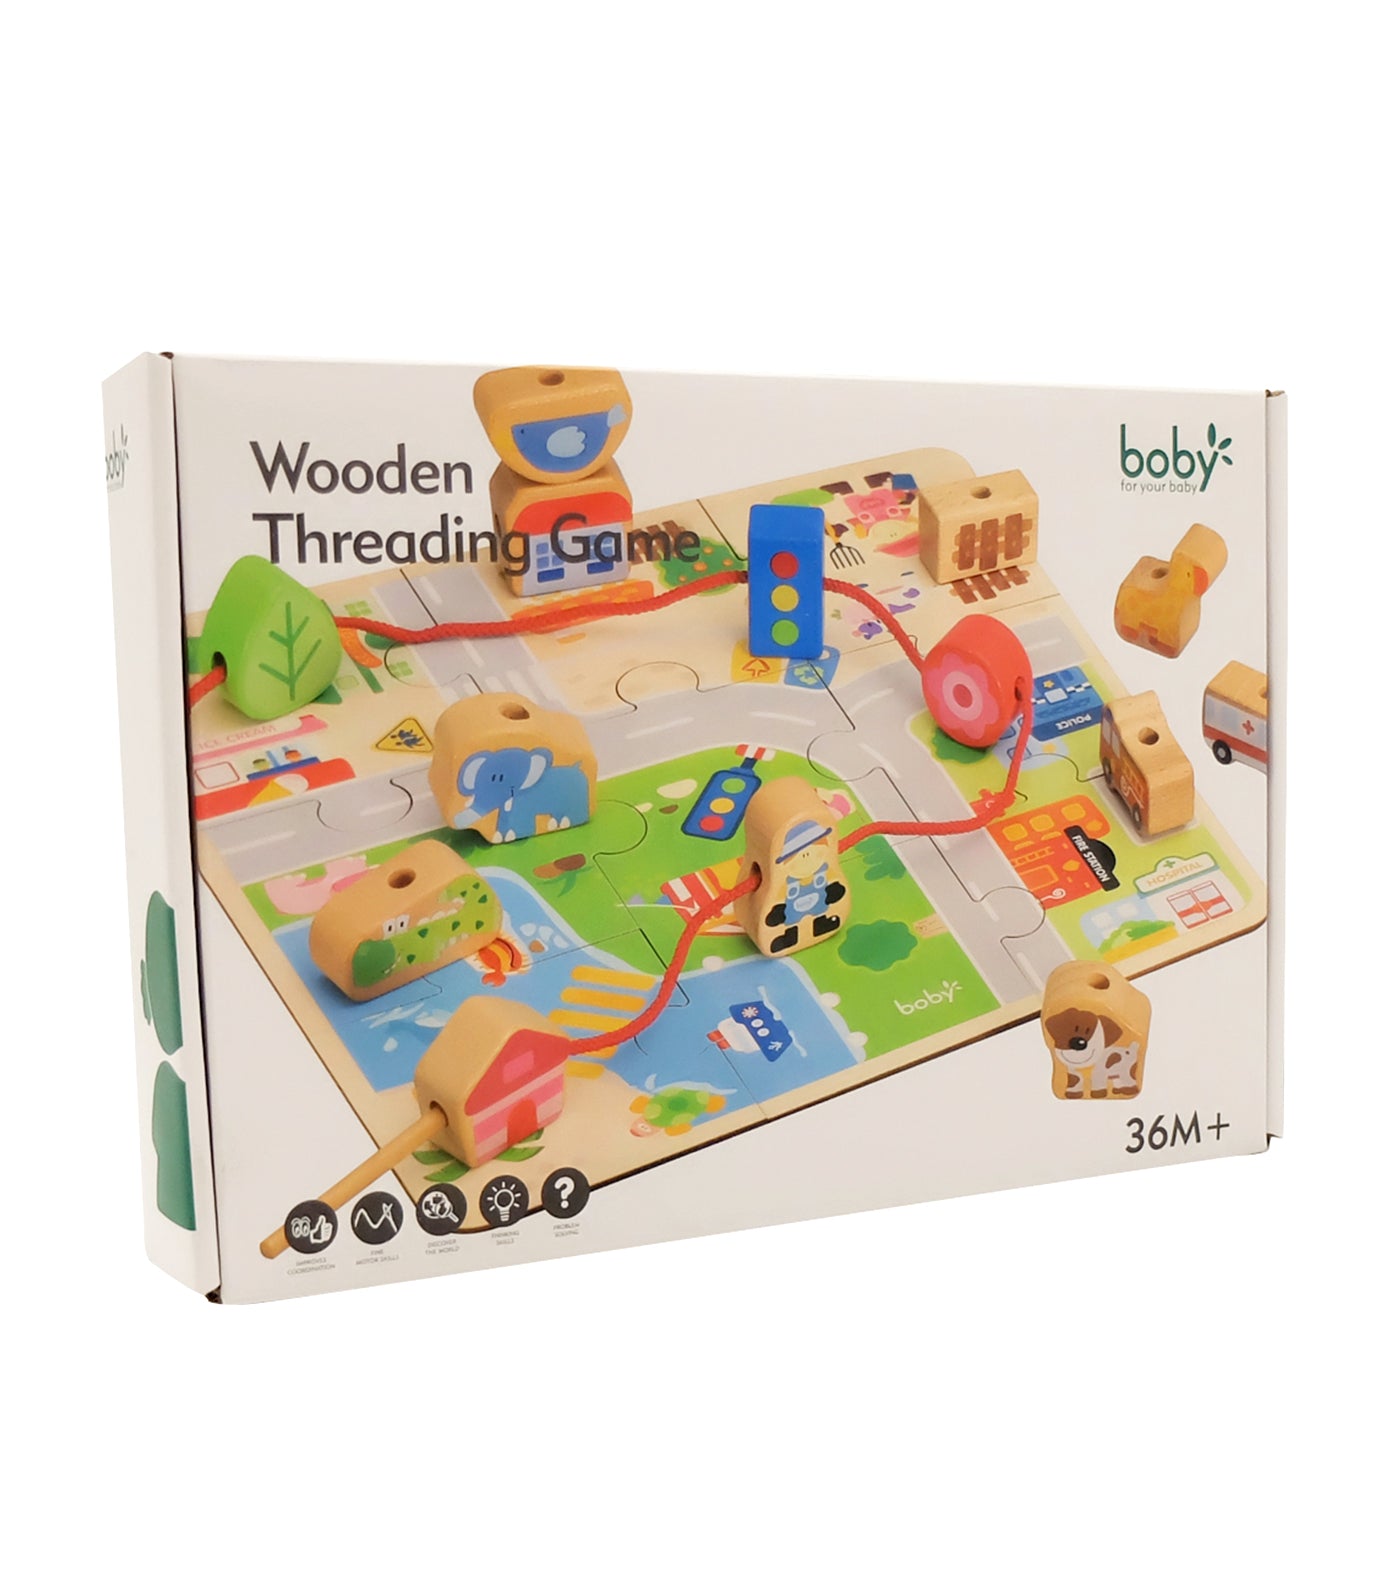 Wooden Threading Game